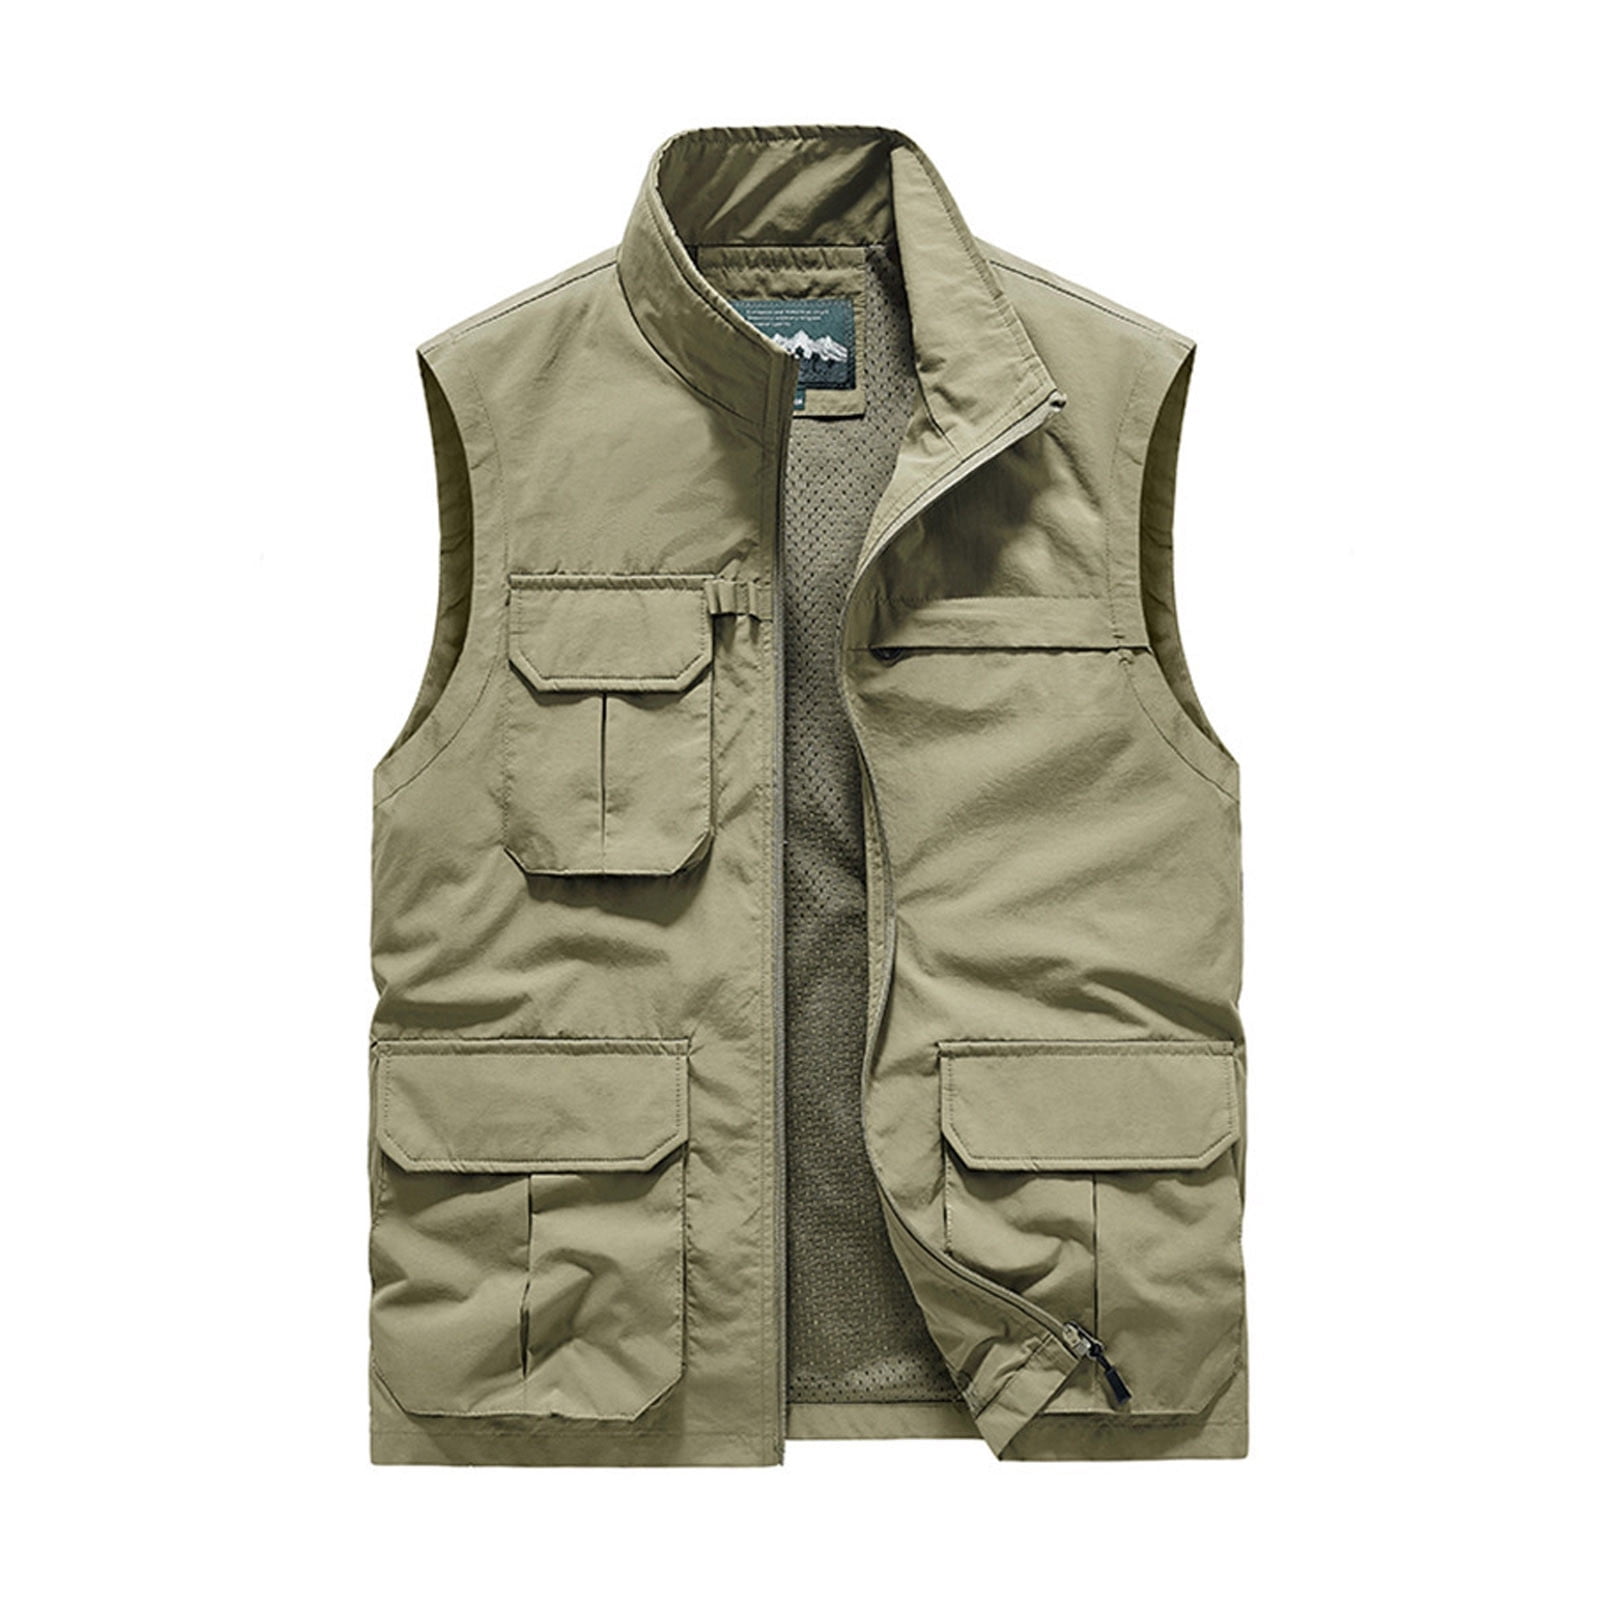 Men's Lightweight Fishing Vest Casual Quick Dry Hunting Travel Photo Vest  Windproof Sleeveless Jackets with Pockets